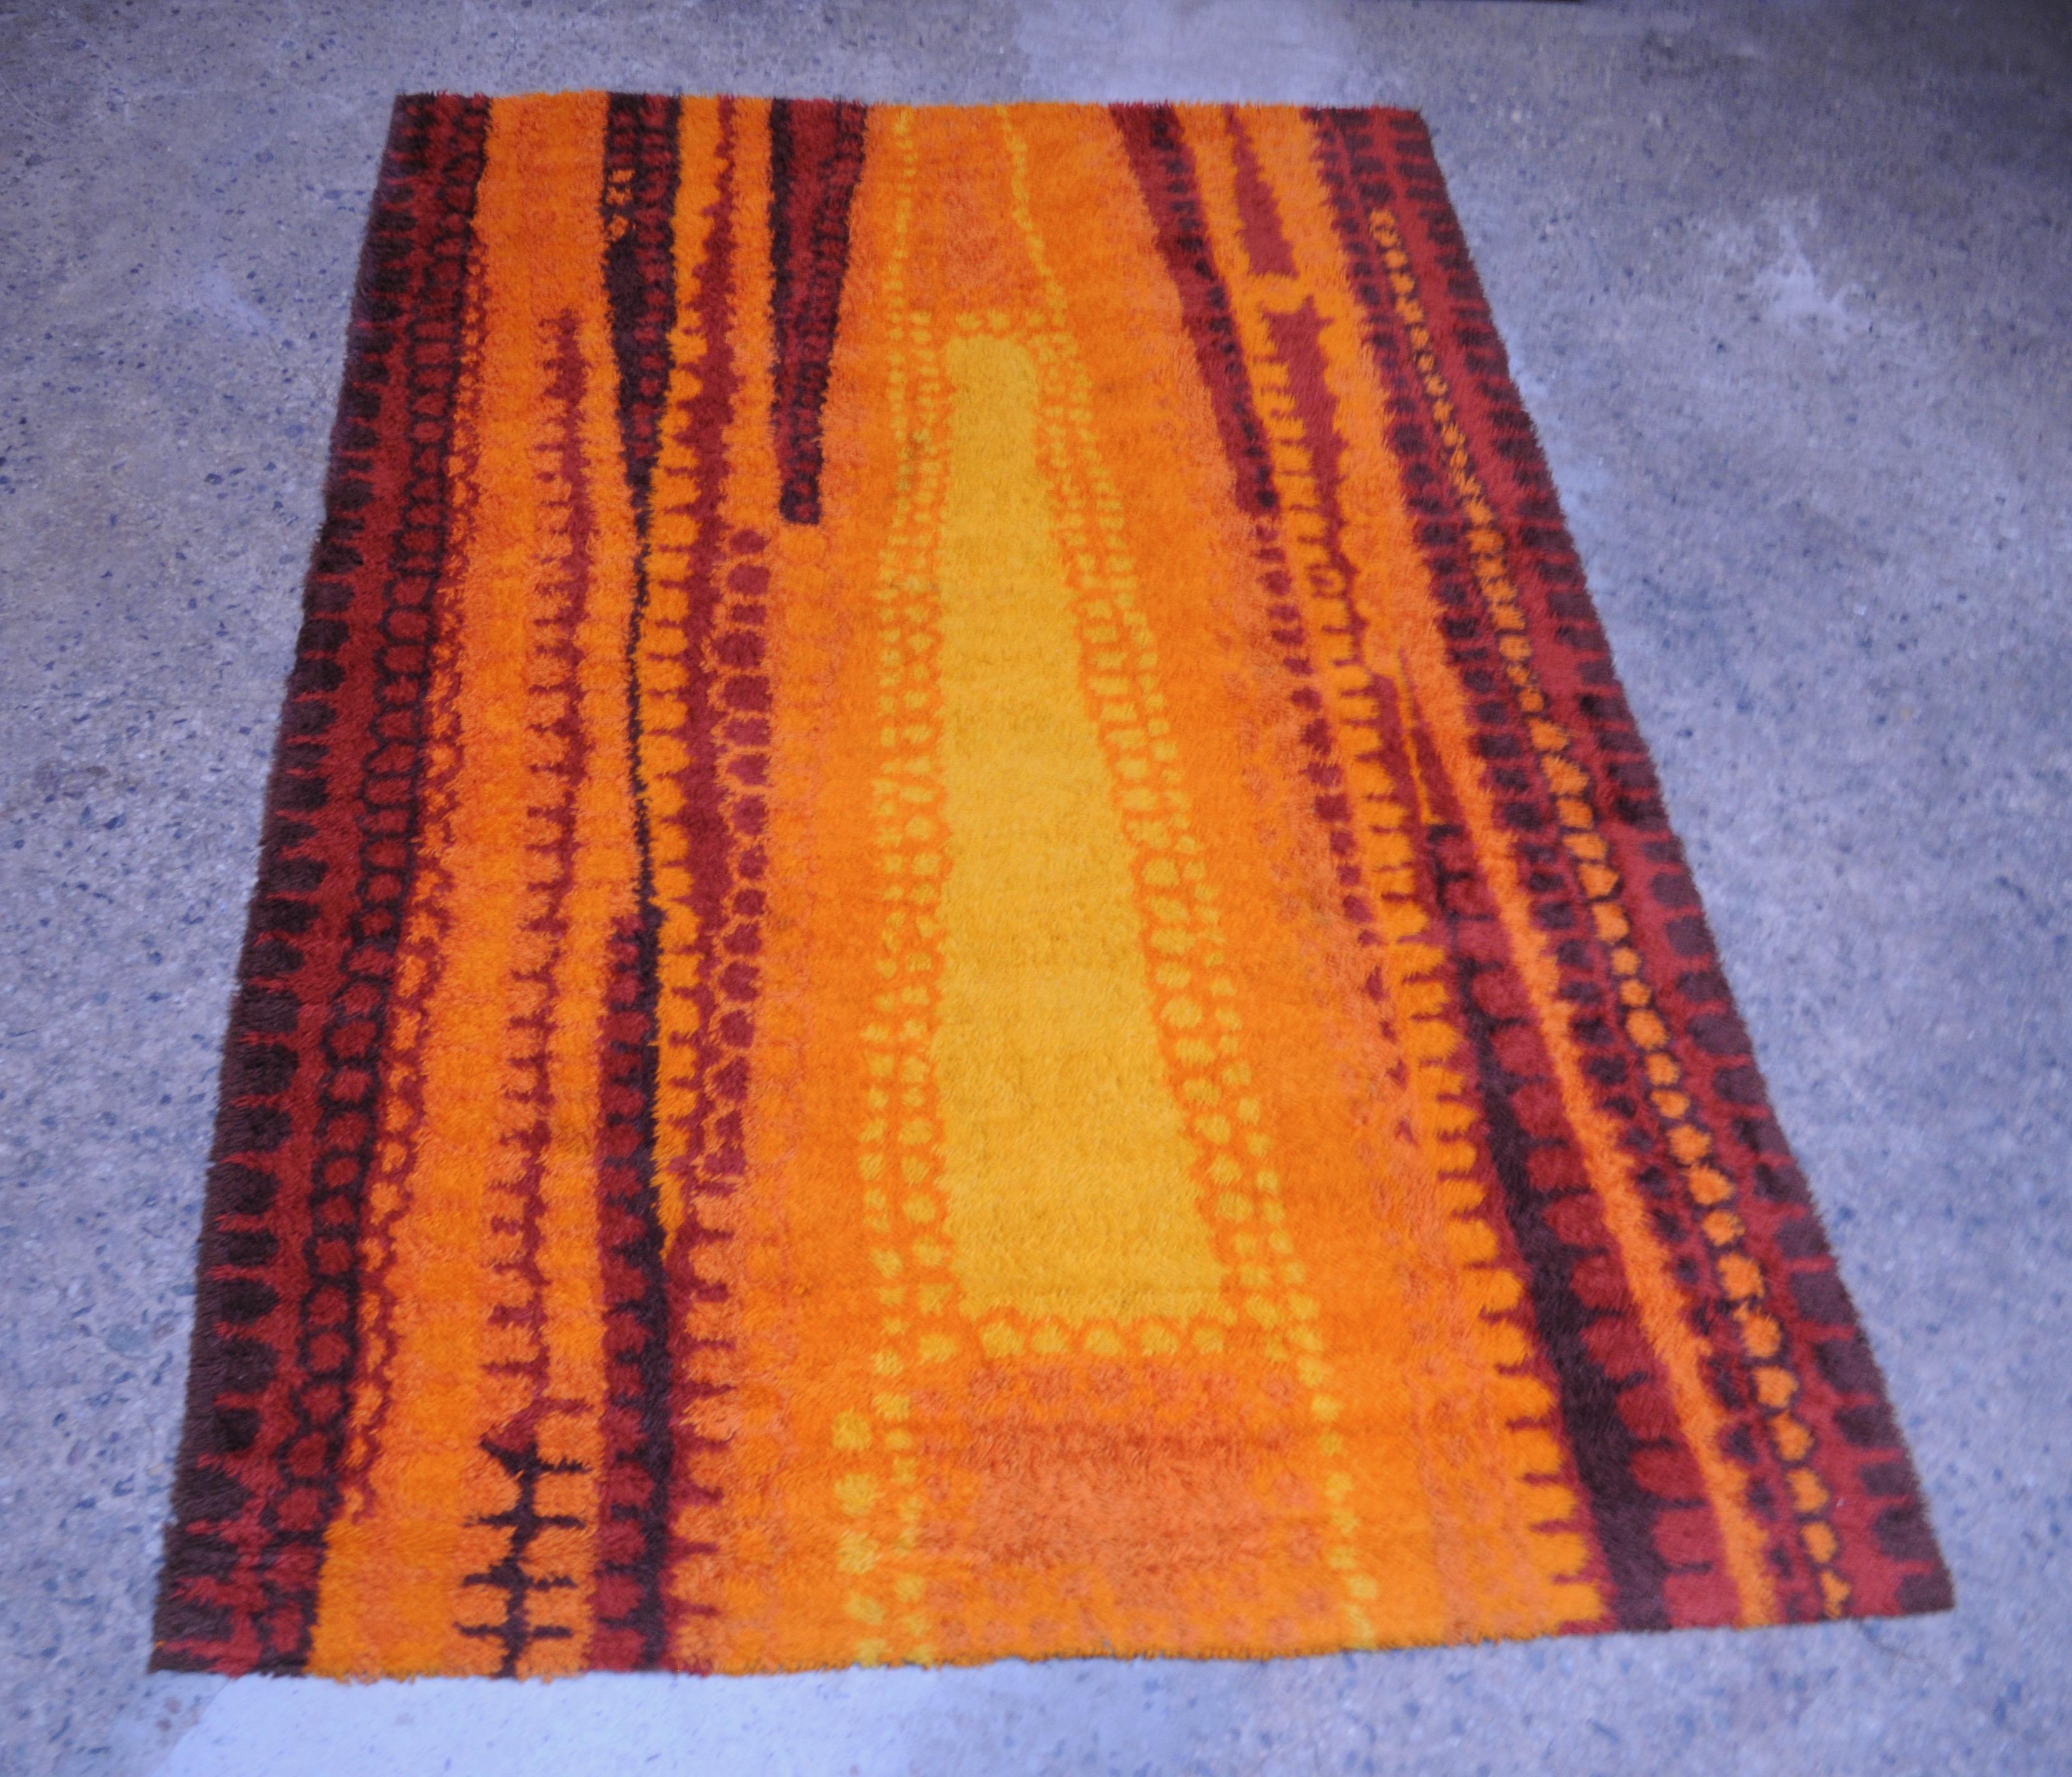 Long, vibrant Rya in orange, yellow, red, and brown. Wonderful texture and abstract lines artfully woven into the high pile. Expertly cleaned and in very good, vintage condition (there is some light strand loss around the yellow swath, as shown) .